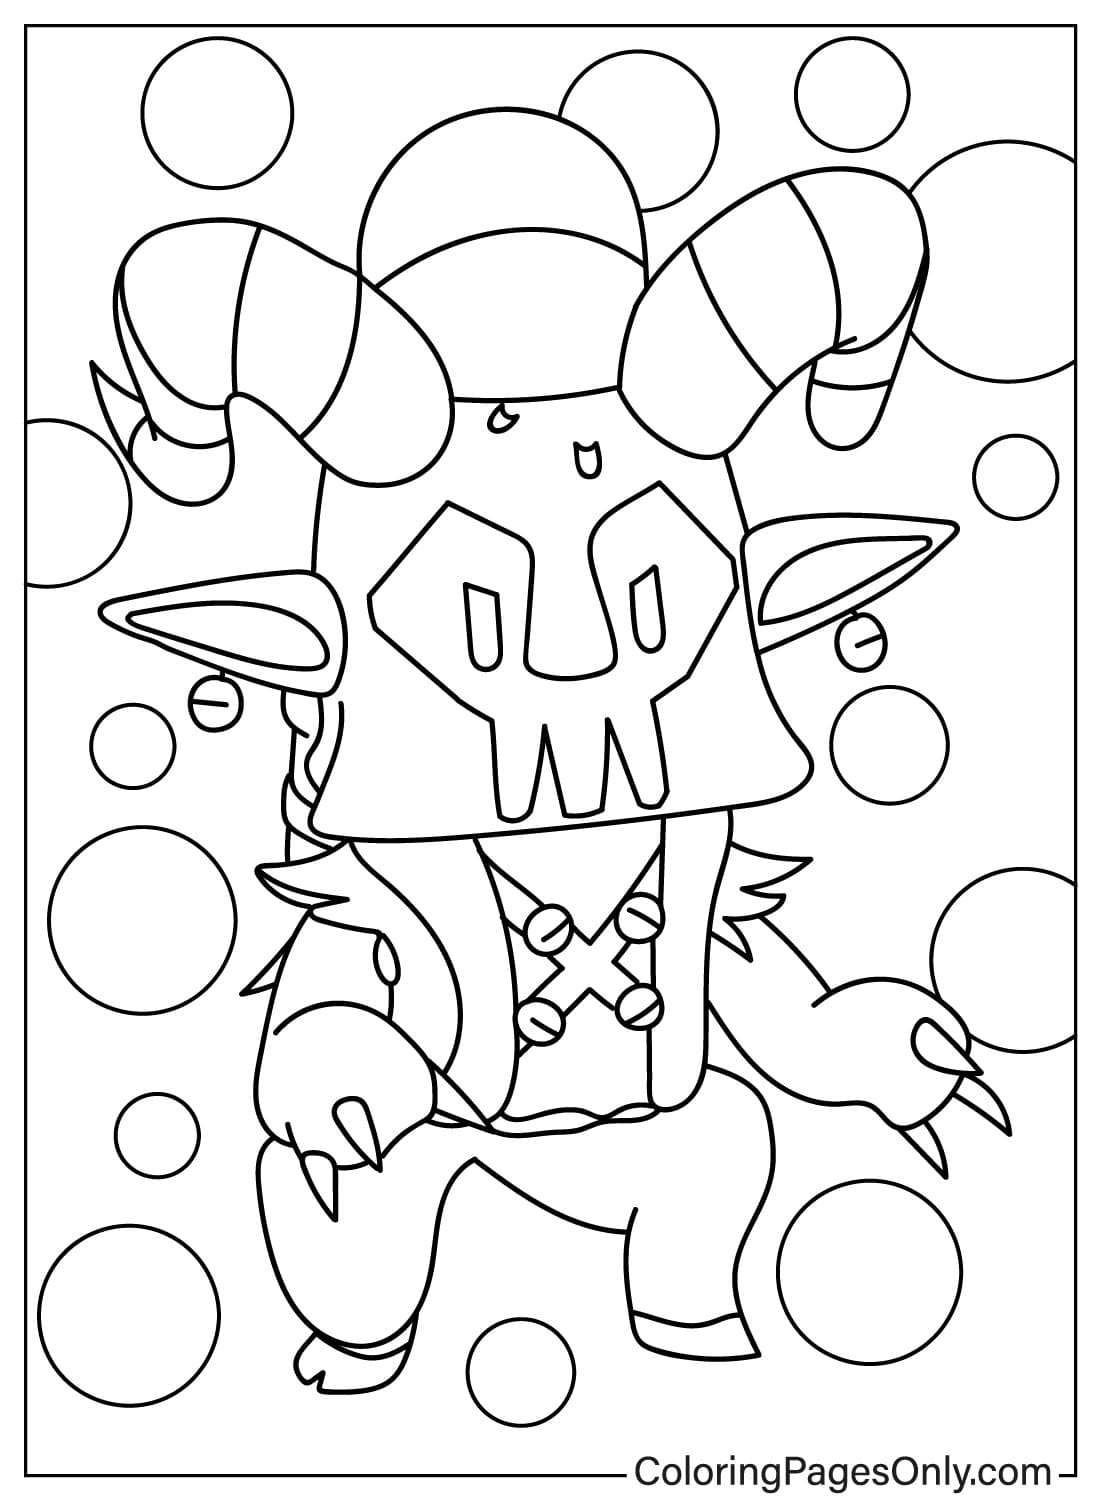 Stumble Guys Pictures Coloring Page from Stumble Guys